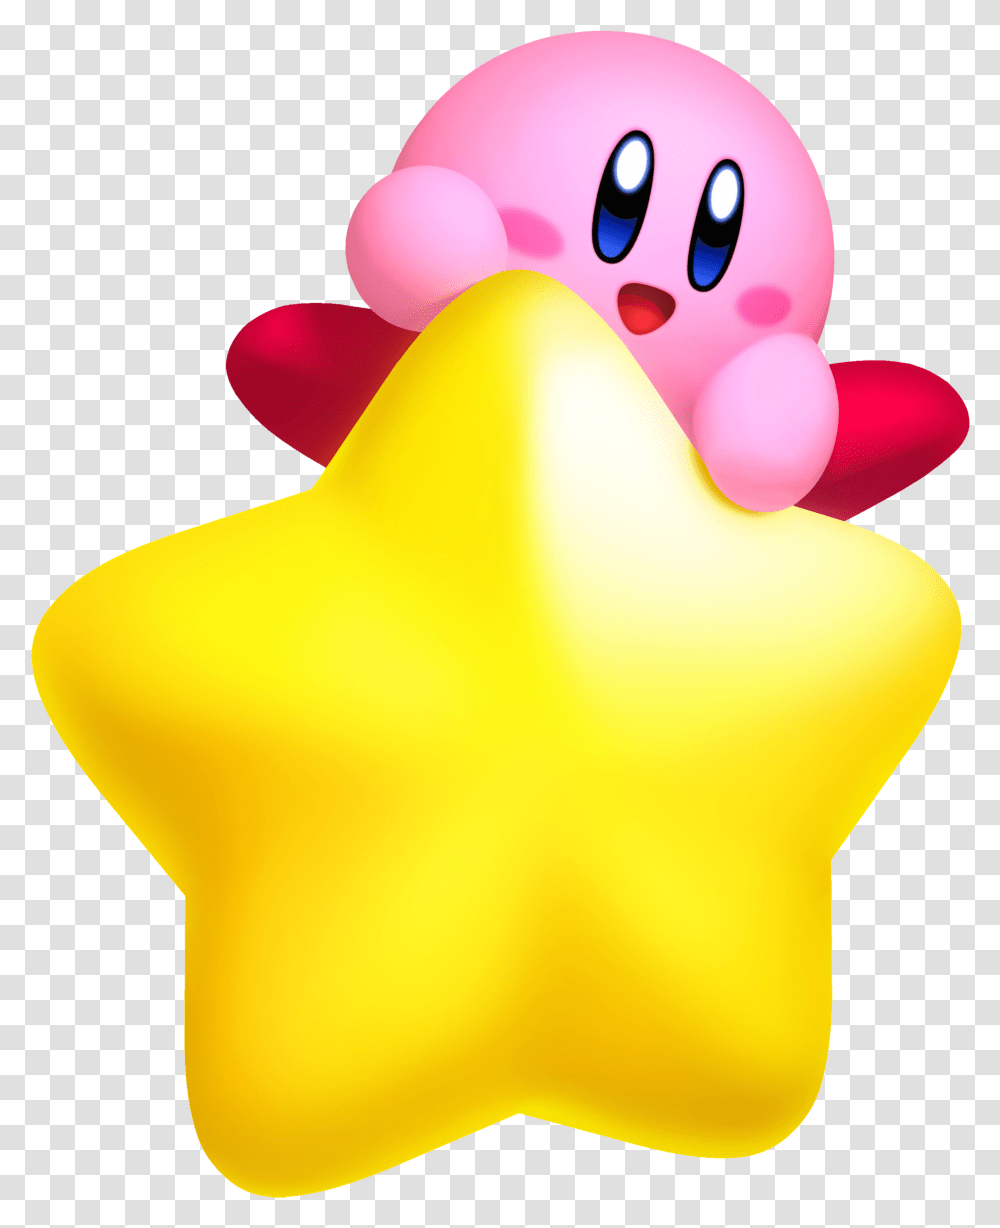 Return Blowout Kirby Robobot Planet Kirby On A Warp Star, Toy, Ball, Bowling, Star Symbol Transparent Png